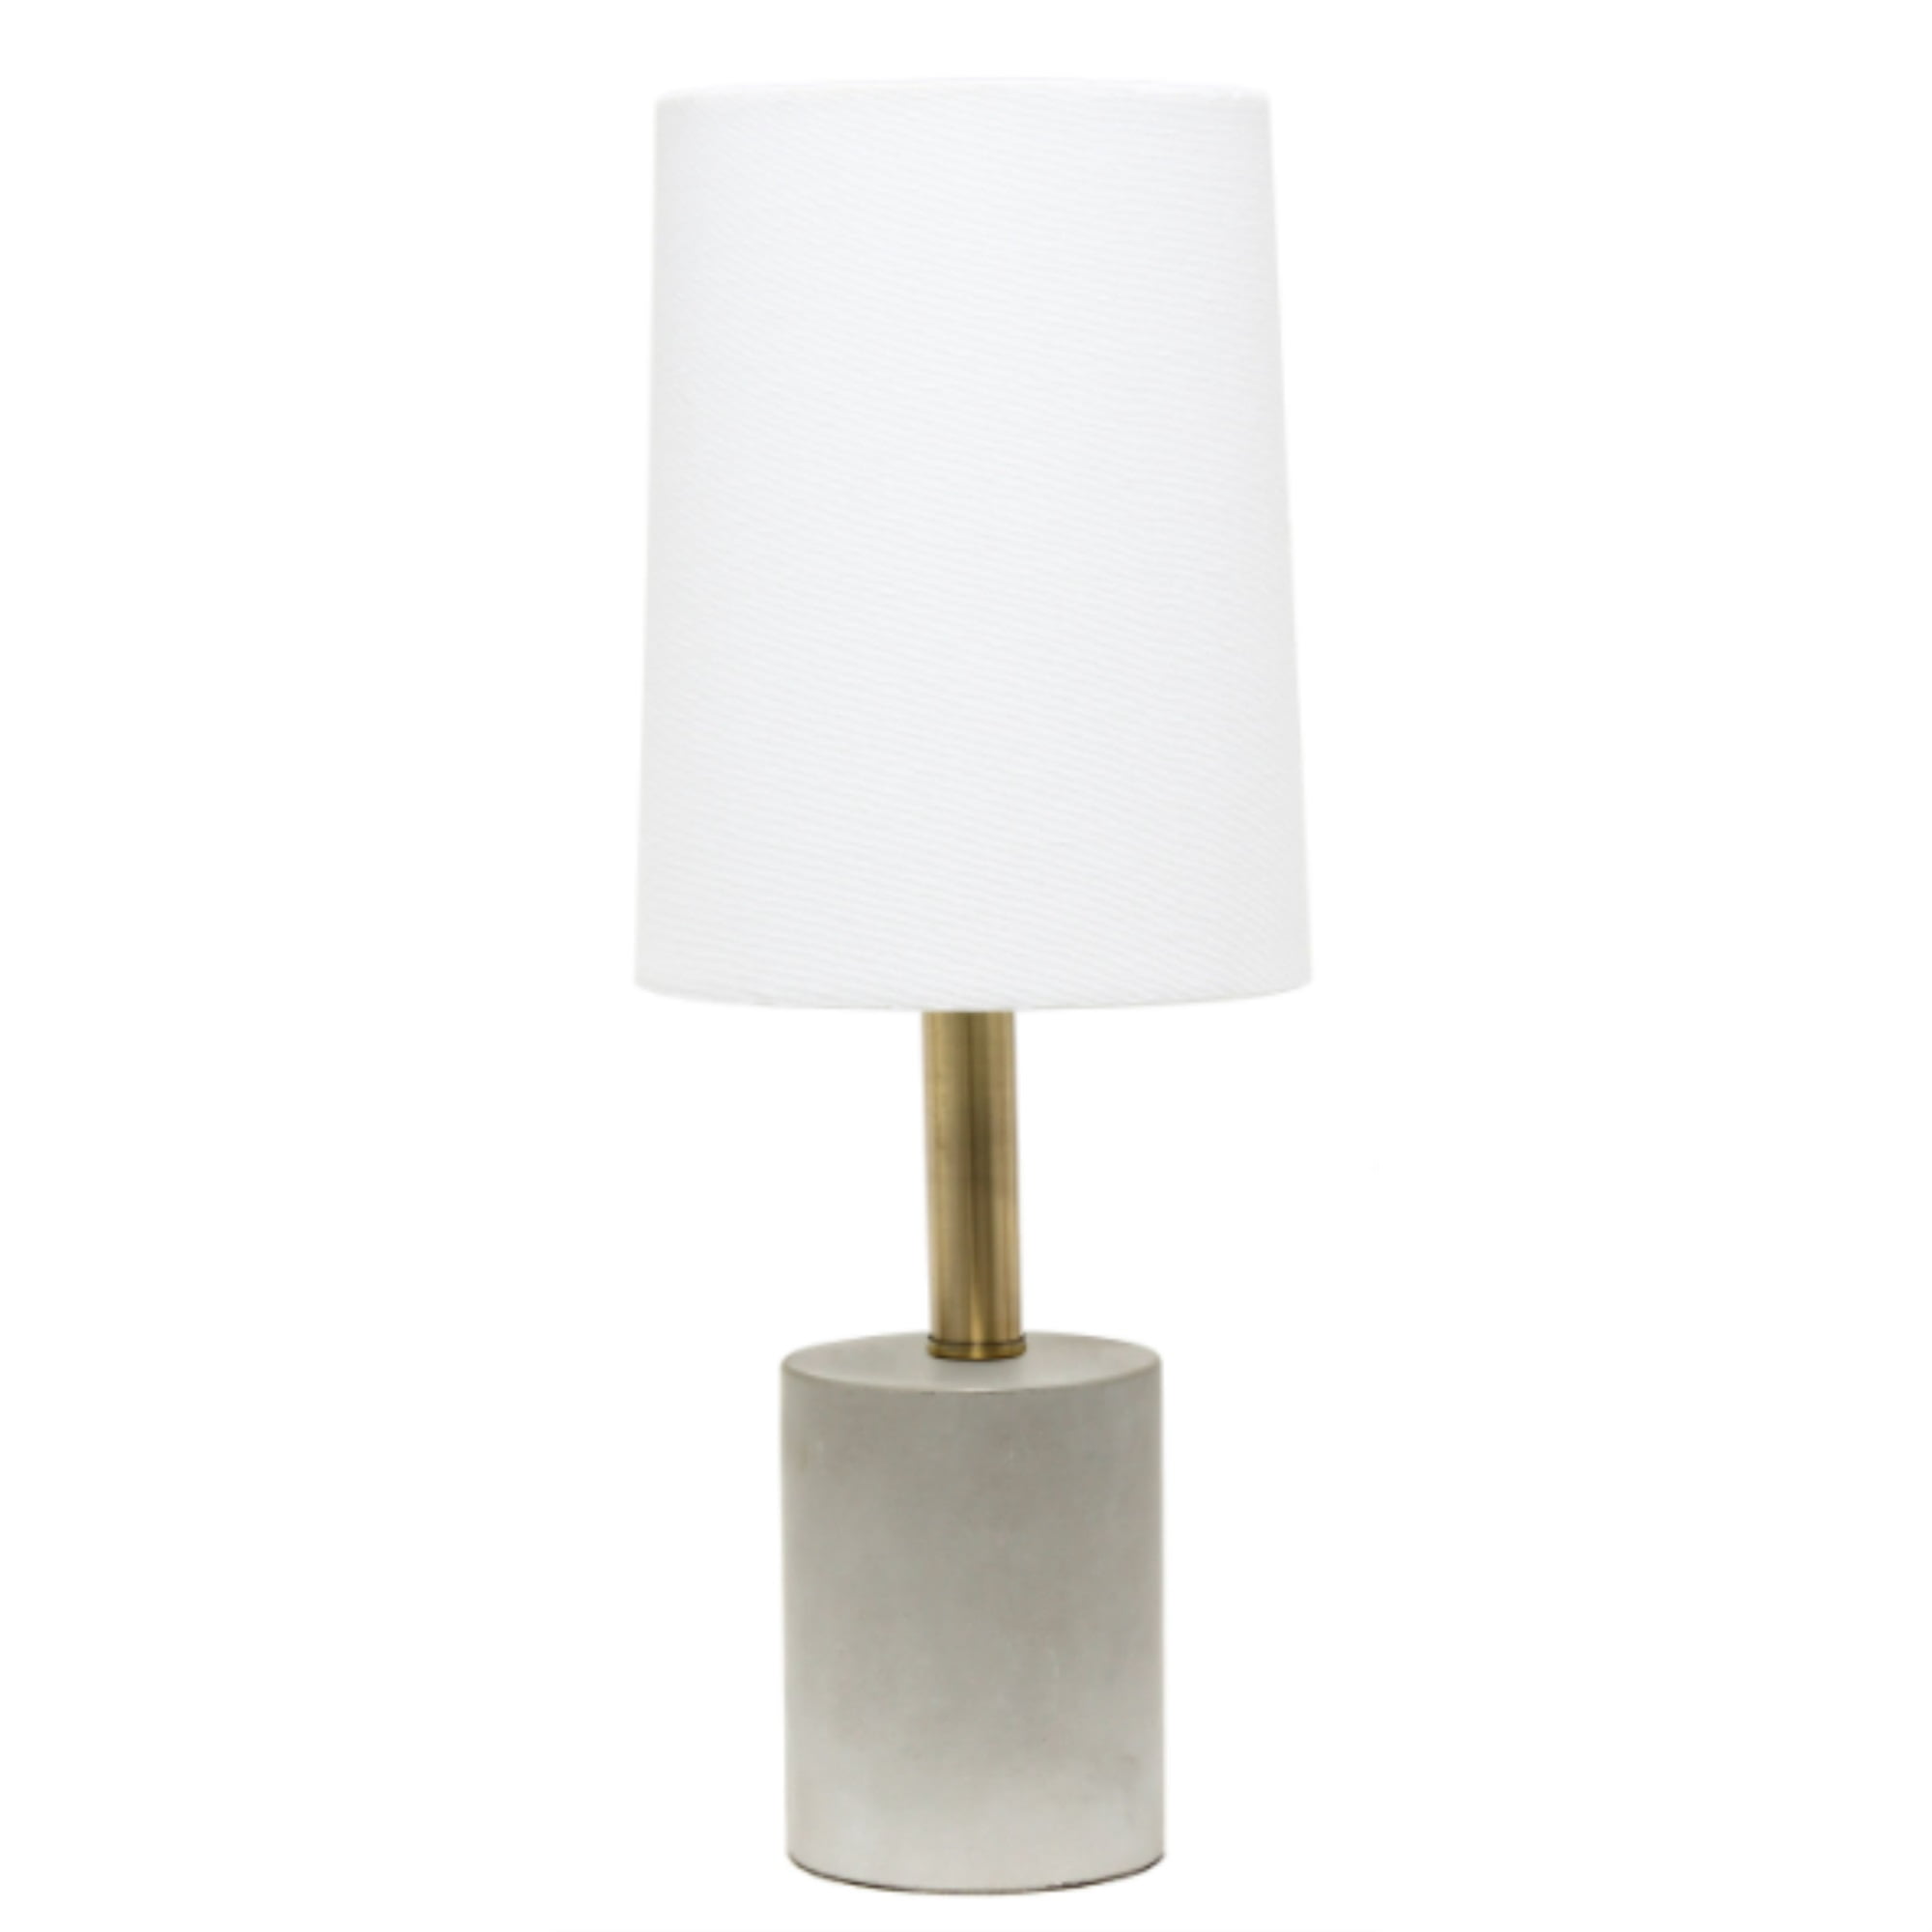  Lalia Home Antique Brass Concrete Table Lamp with Linen Shade, White 